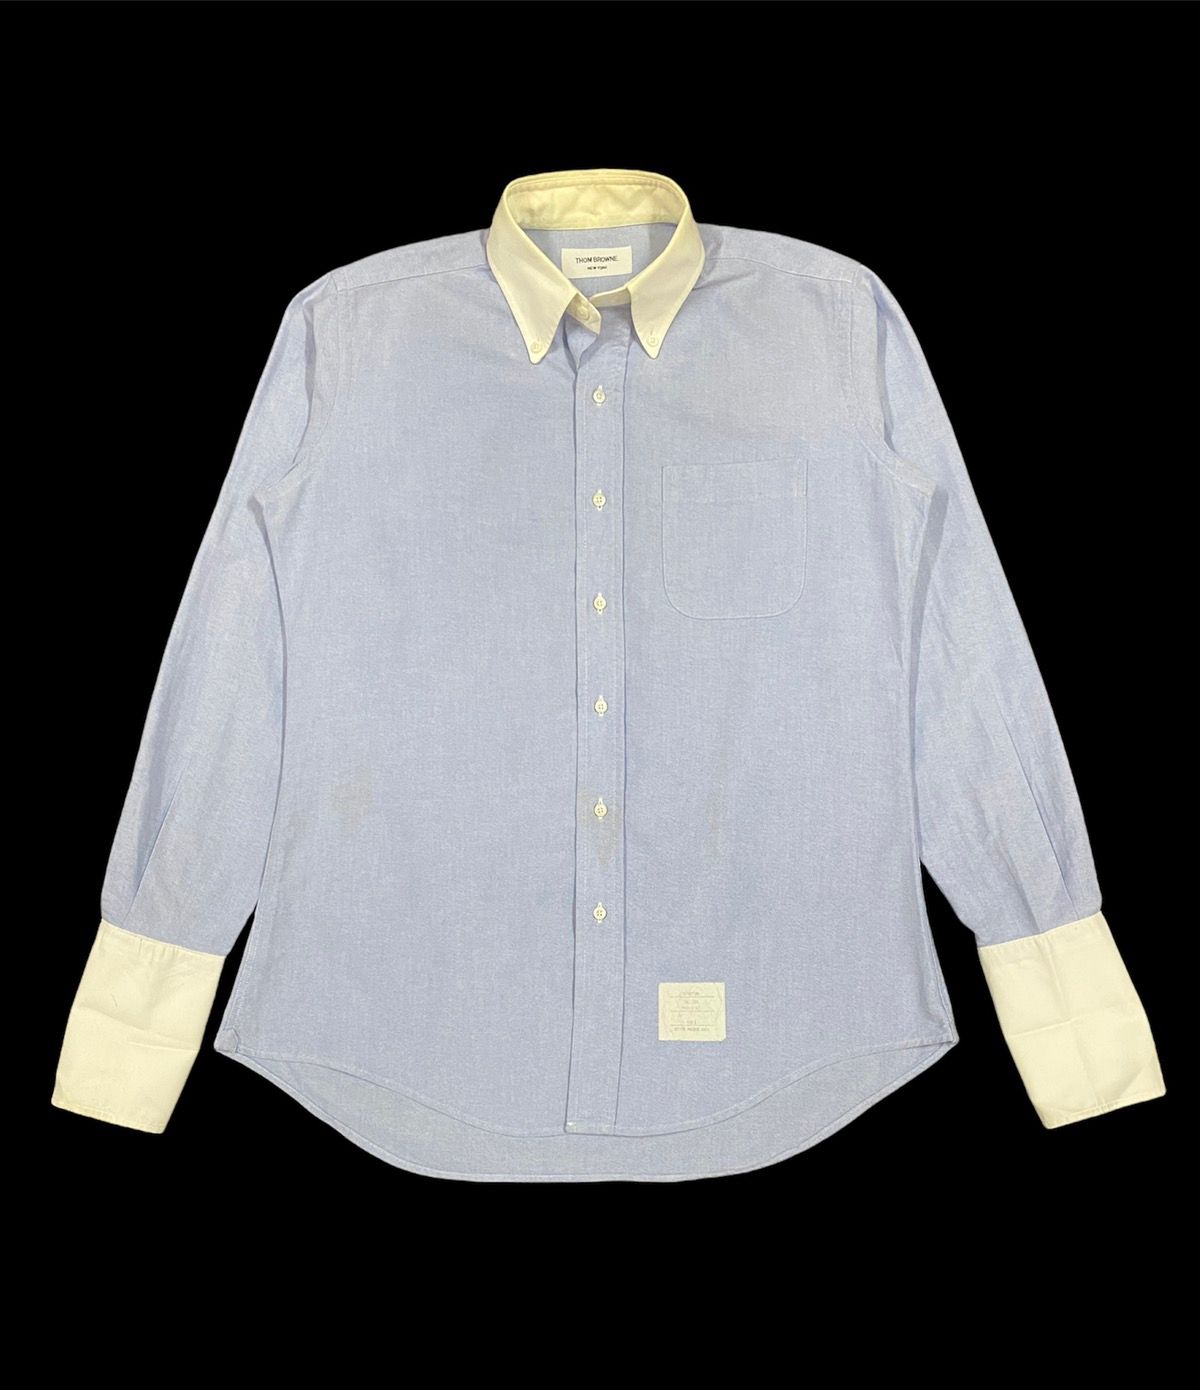 Authentic🔥Thom Browne Blue Oxford Button Down Shirt Size 3 - 1